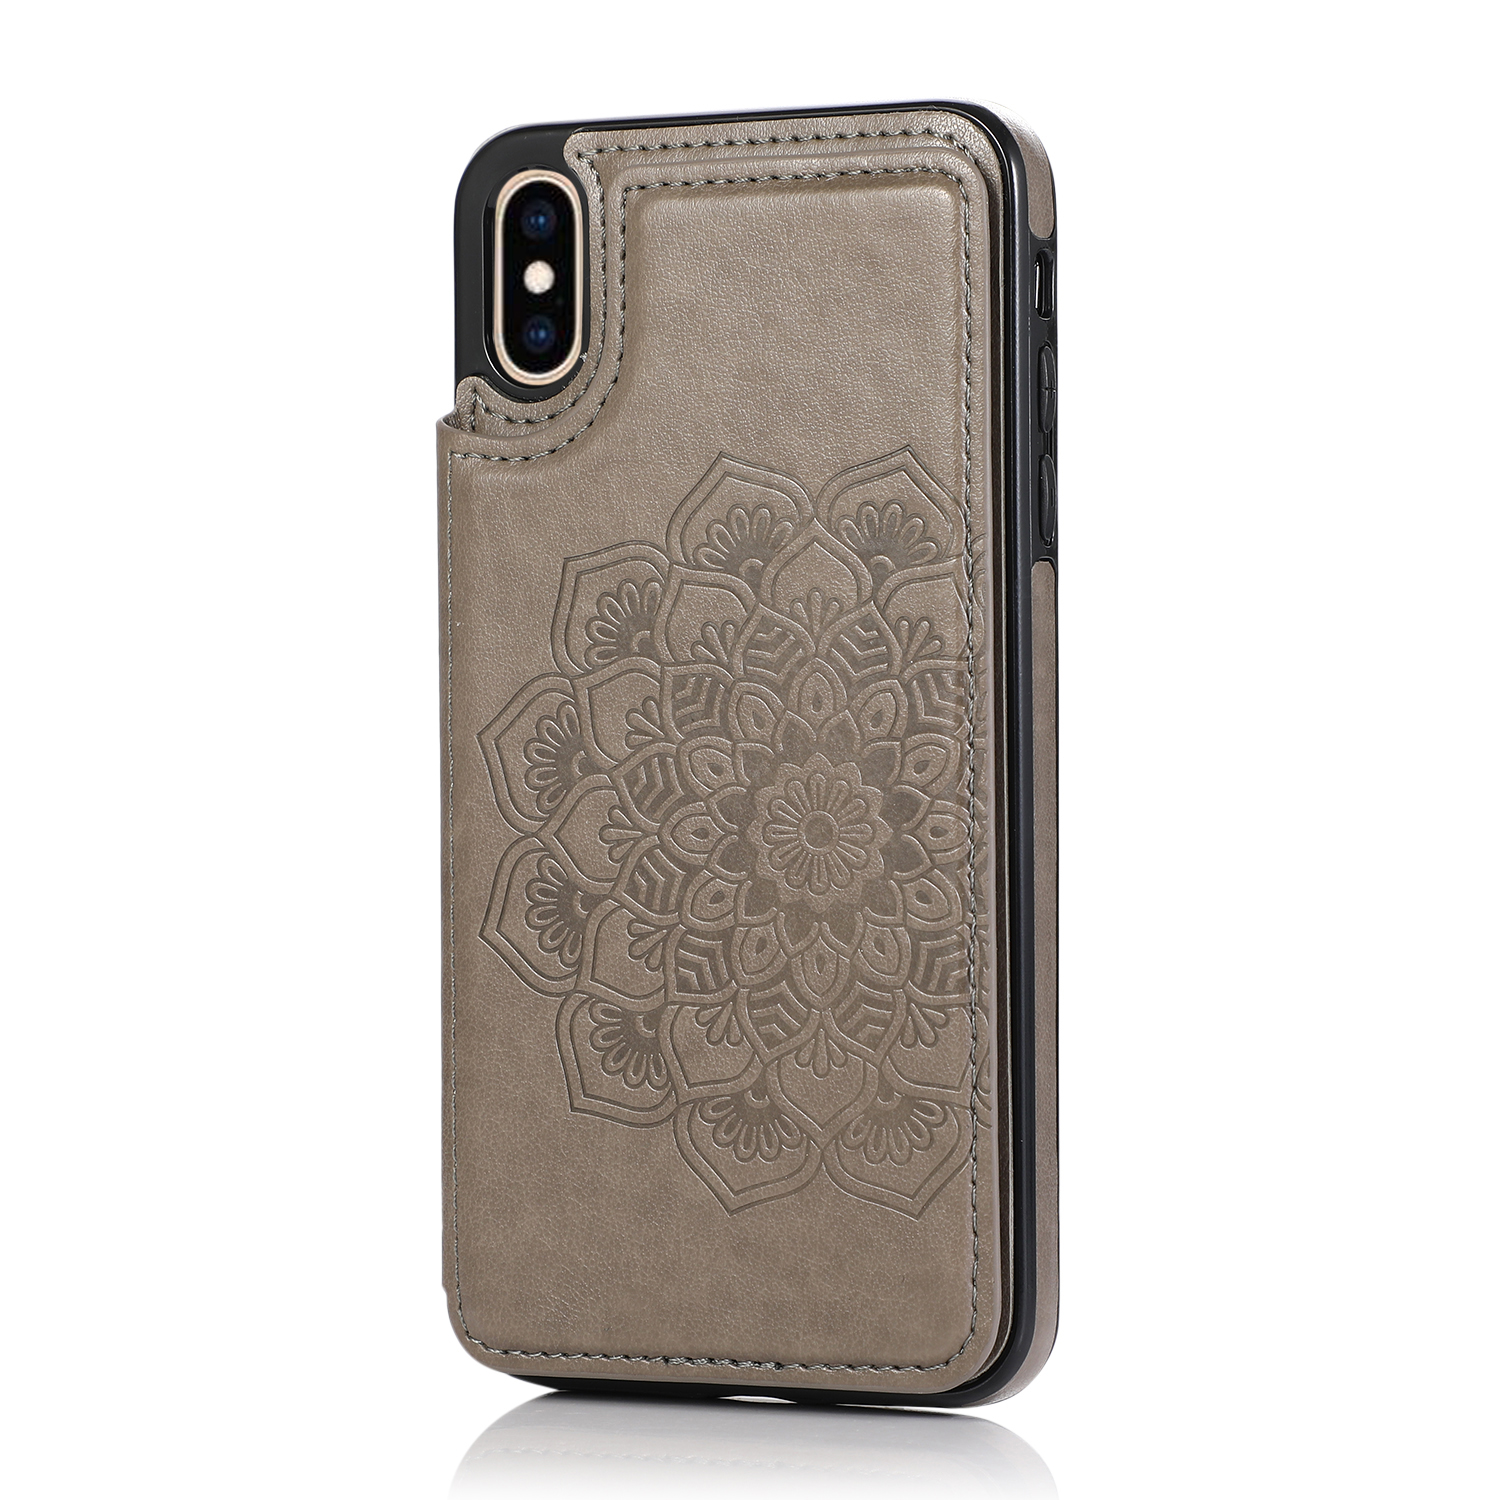 Embossed leather phone case